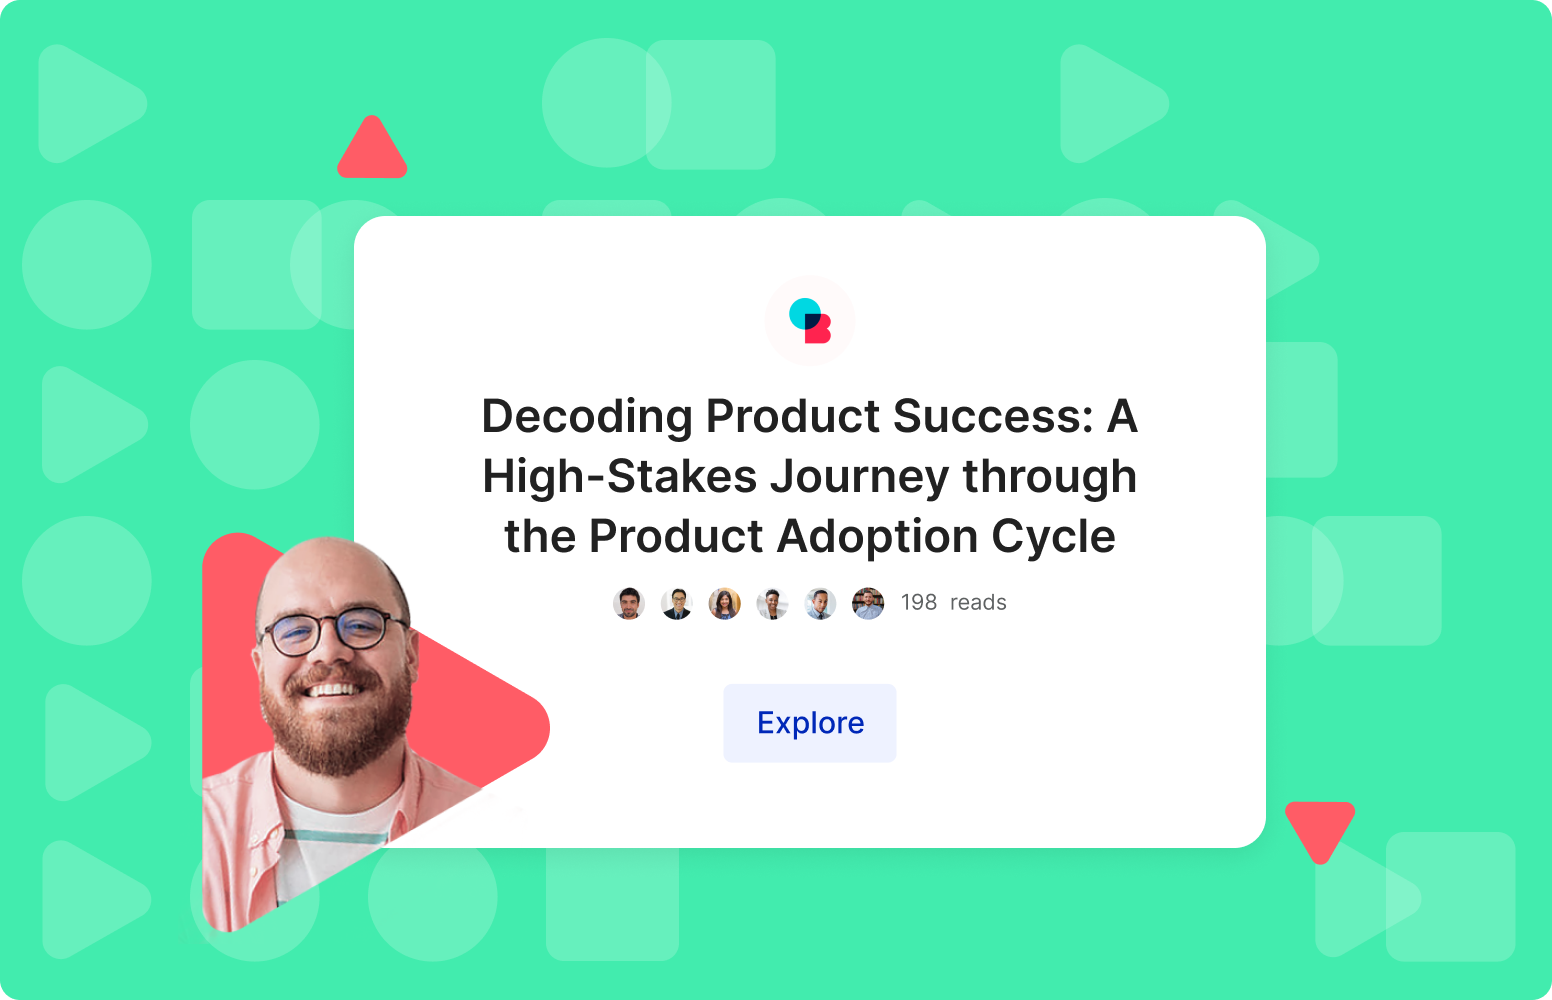 Decoding Product Success: A High-Stakes Journey through the Product Adoption Cycle_background